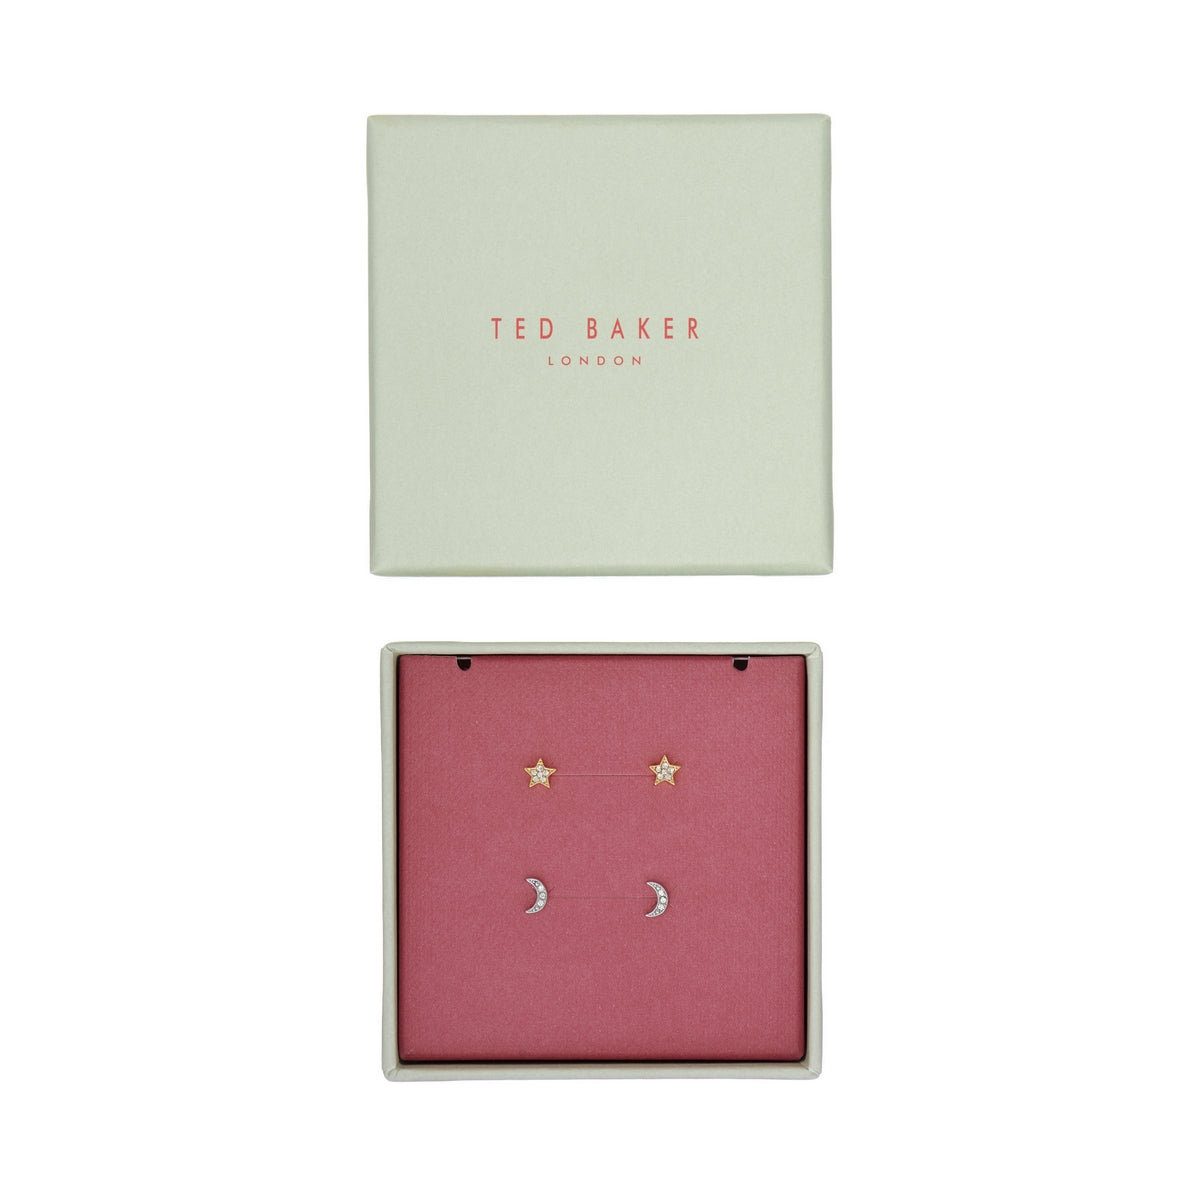 ted baker melanyy: celestial stud earring gift set gol and silver tone clear crystal